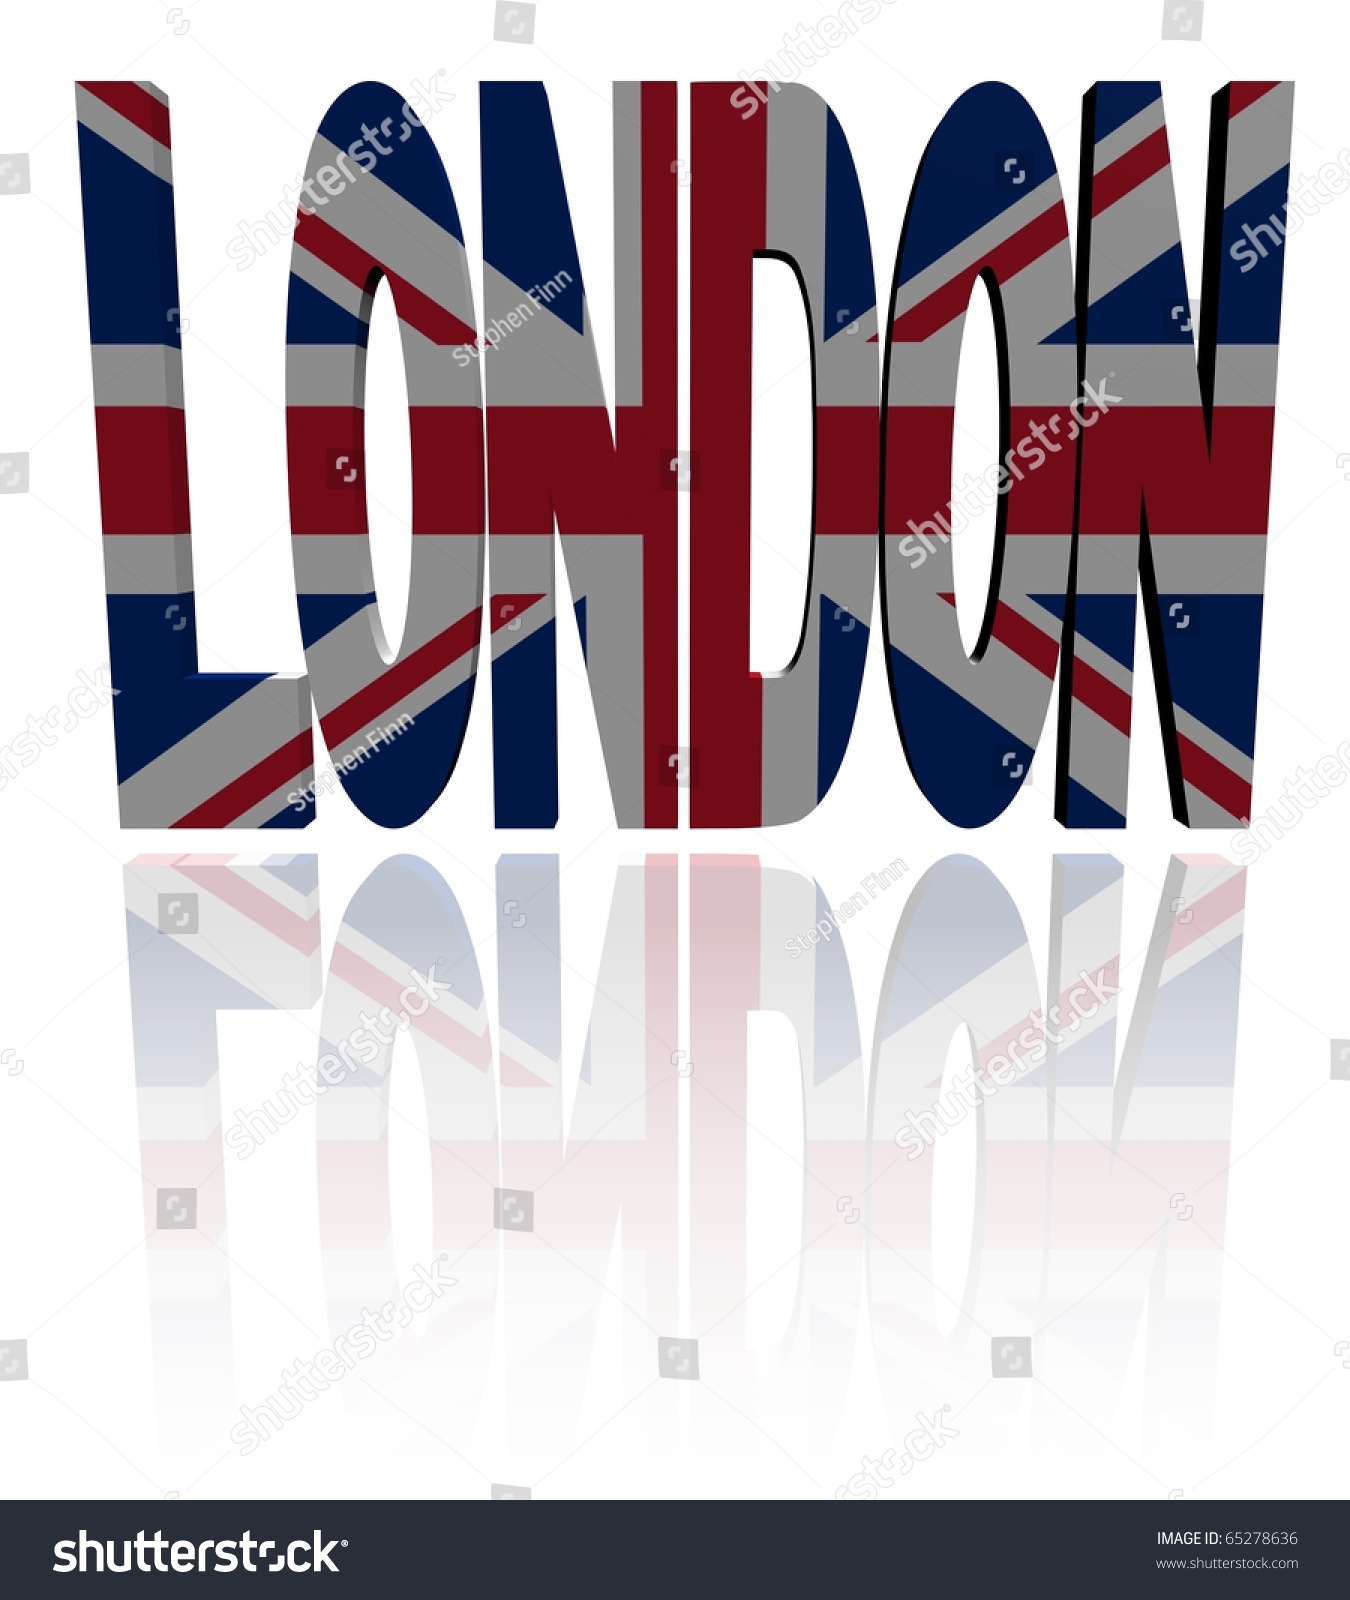 London Text With British Flag Illustration - 65278636 : Shutterstock